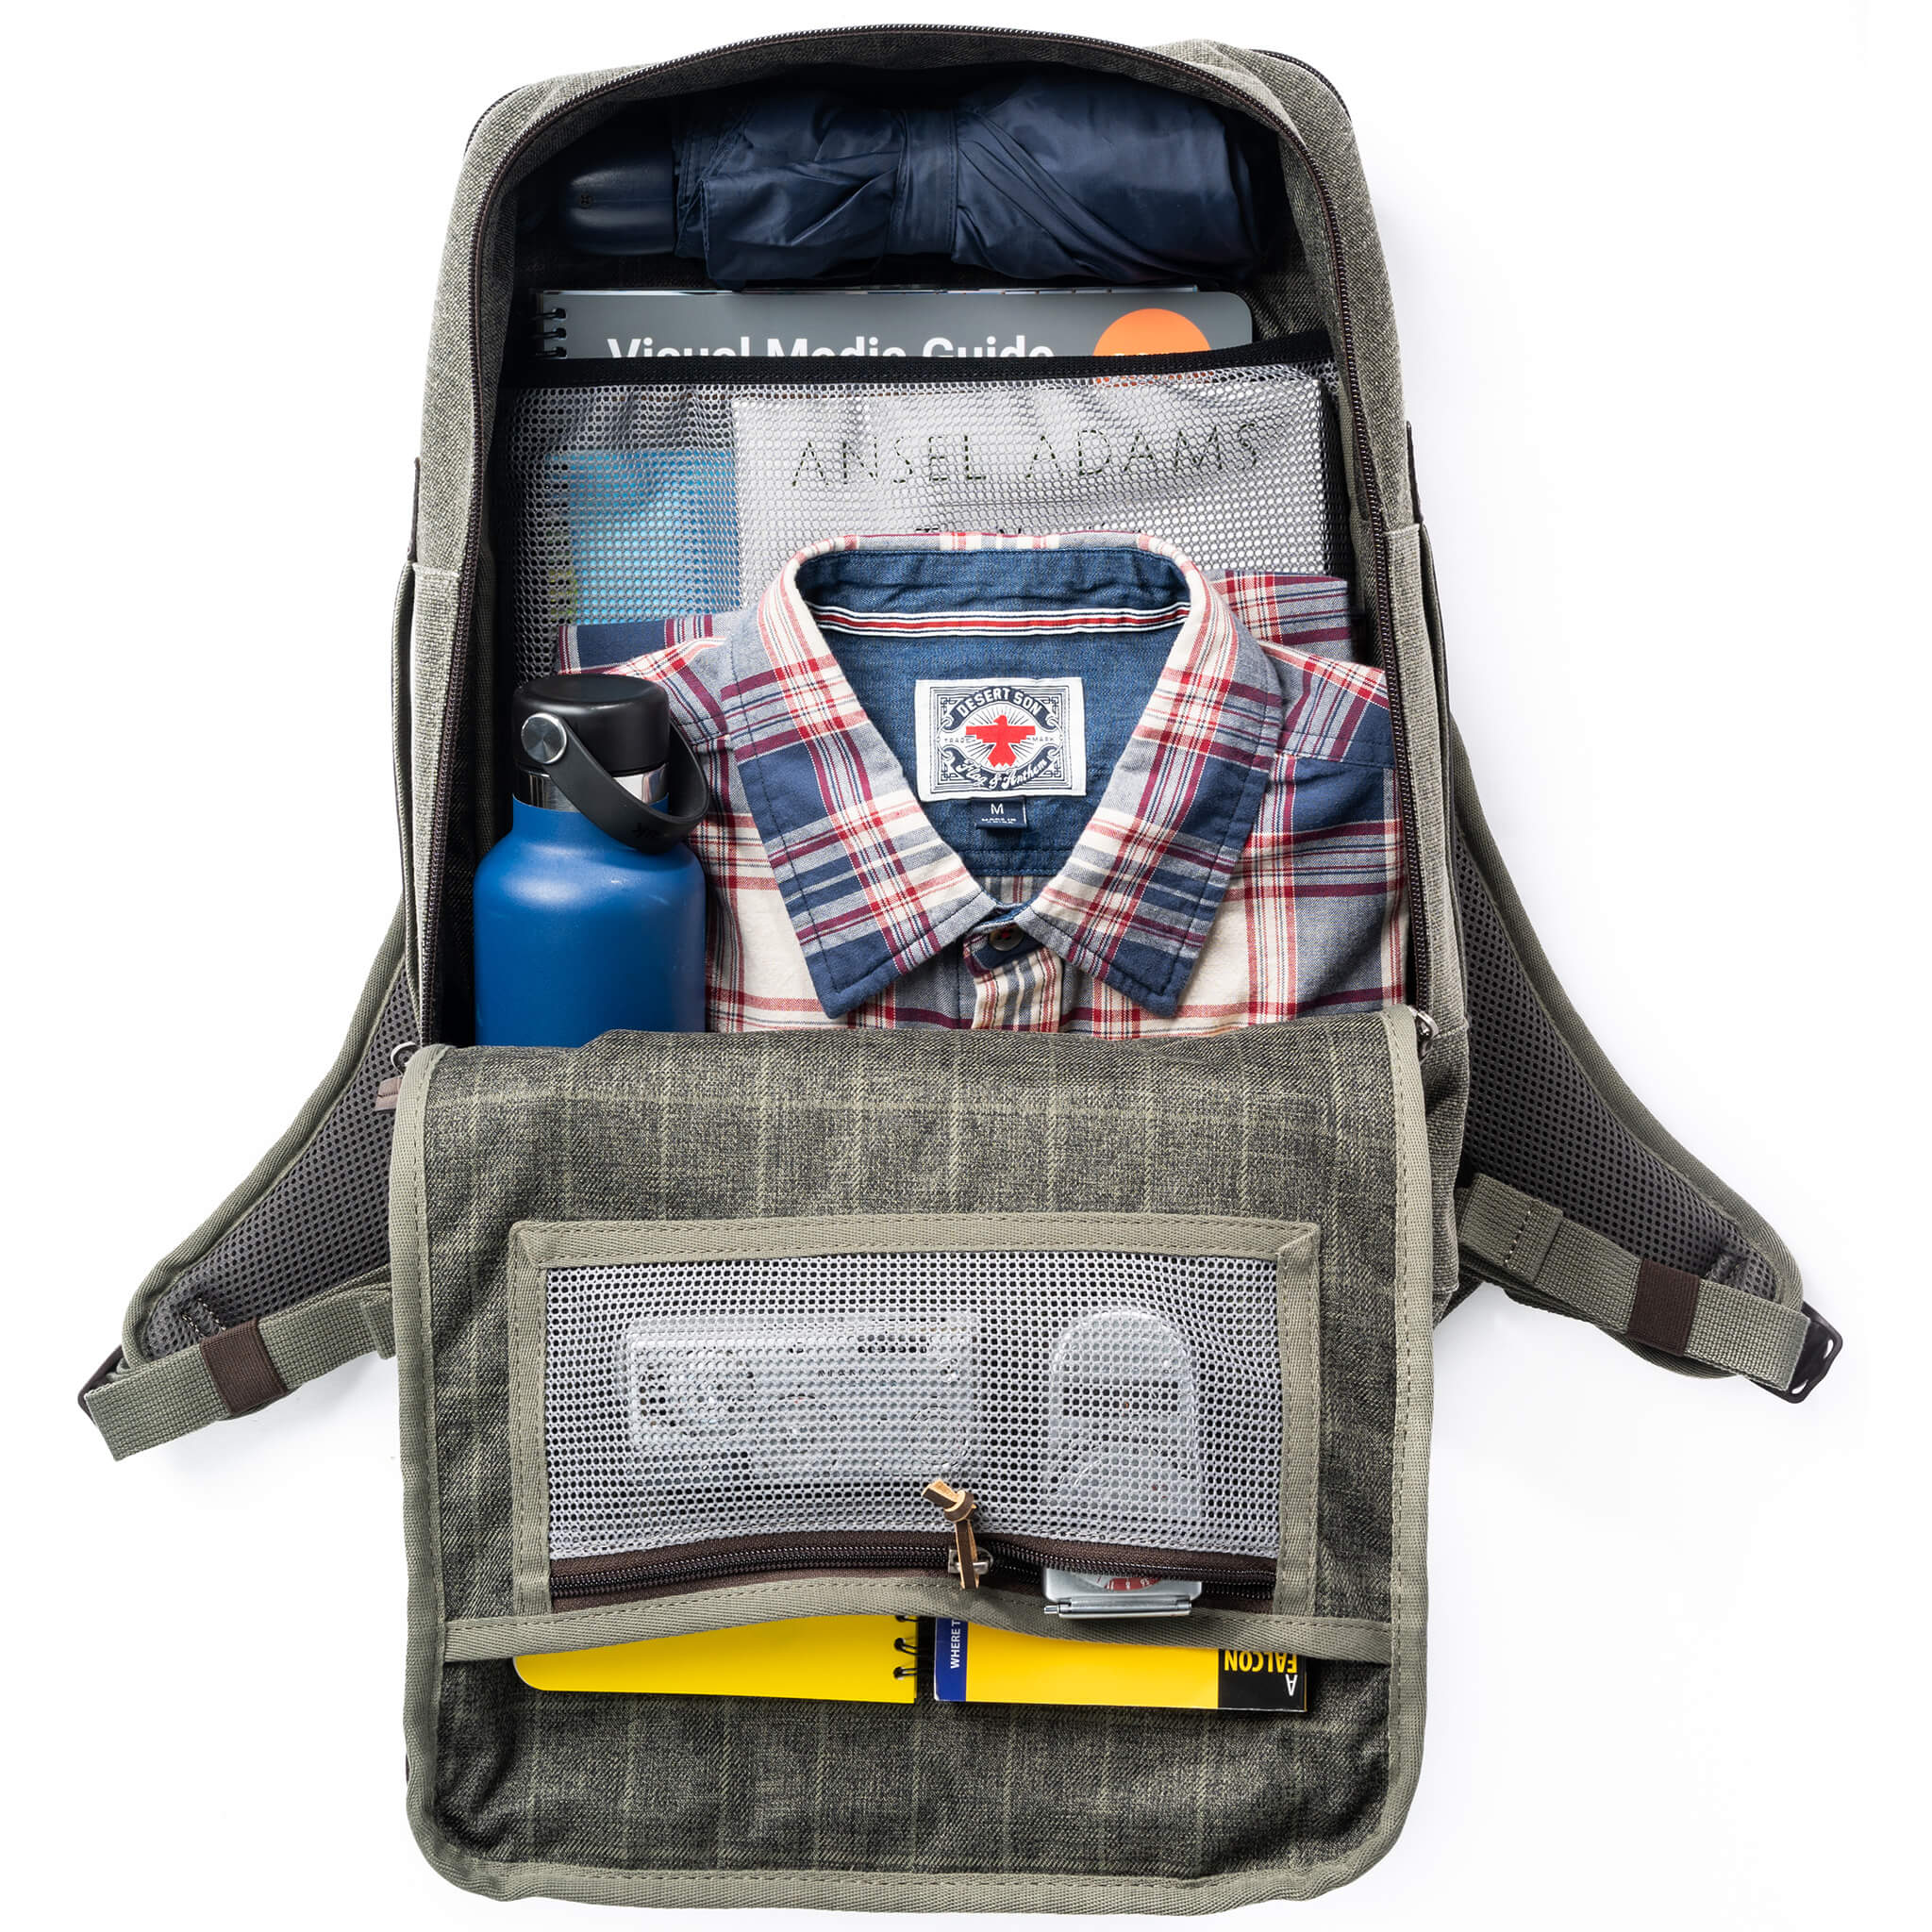 Main compartment sized to fit a pair of shoes, water bottle and light jacket. Features two mesh pockets and a Letter/A4-sized dedicated sleeve.